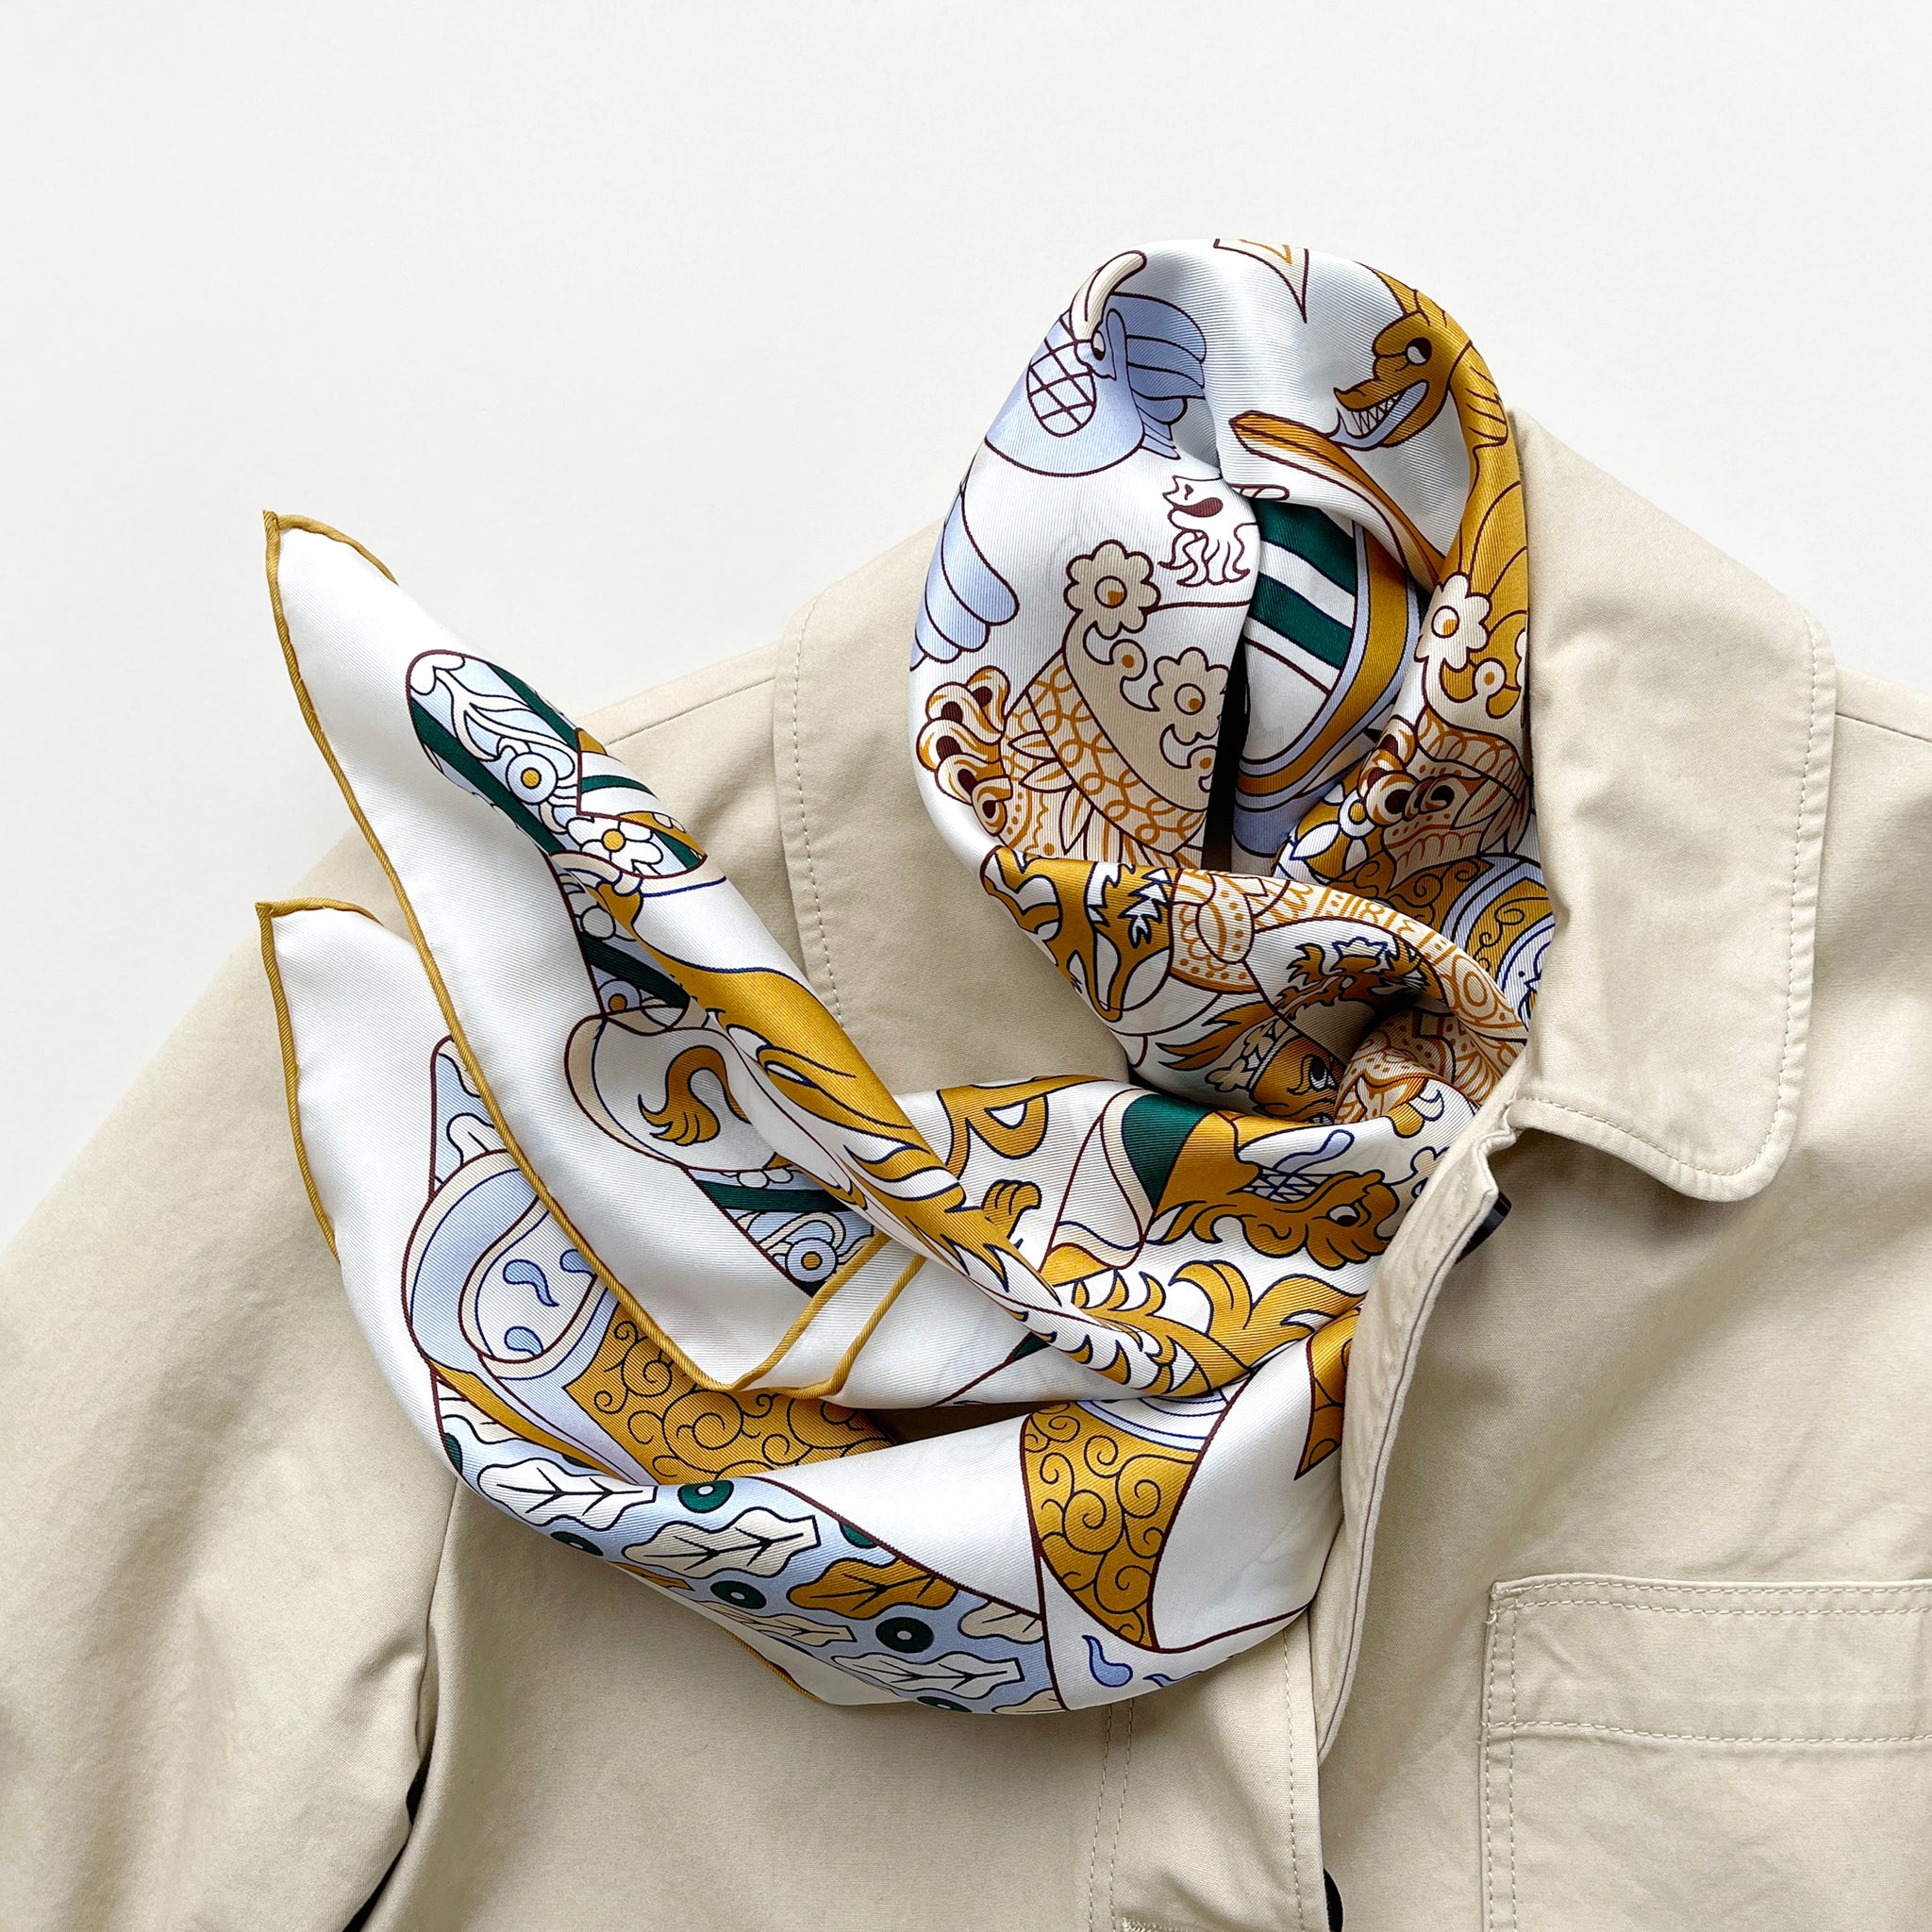 a large square silk scarf featuring Greek mythology print in mustard yellow, green and sky blue on a white base, with mustard yellow hand-rolled edge, tied as a neck scarf, paired with a beige coat